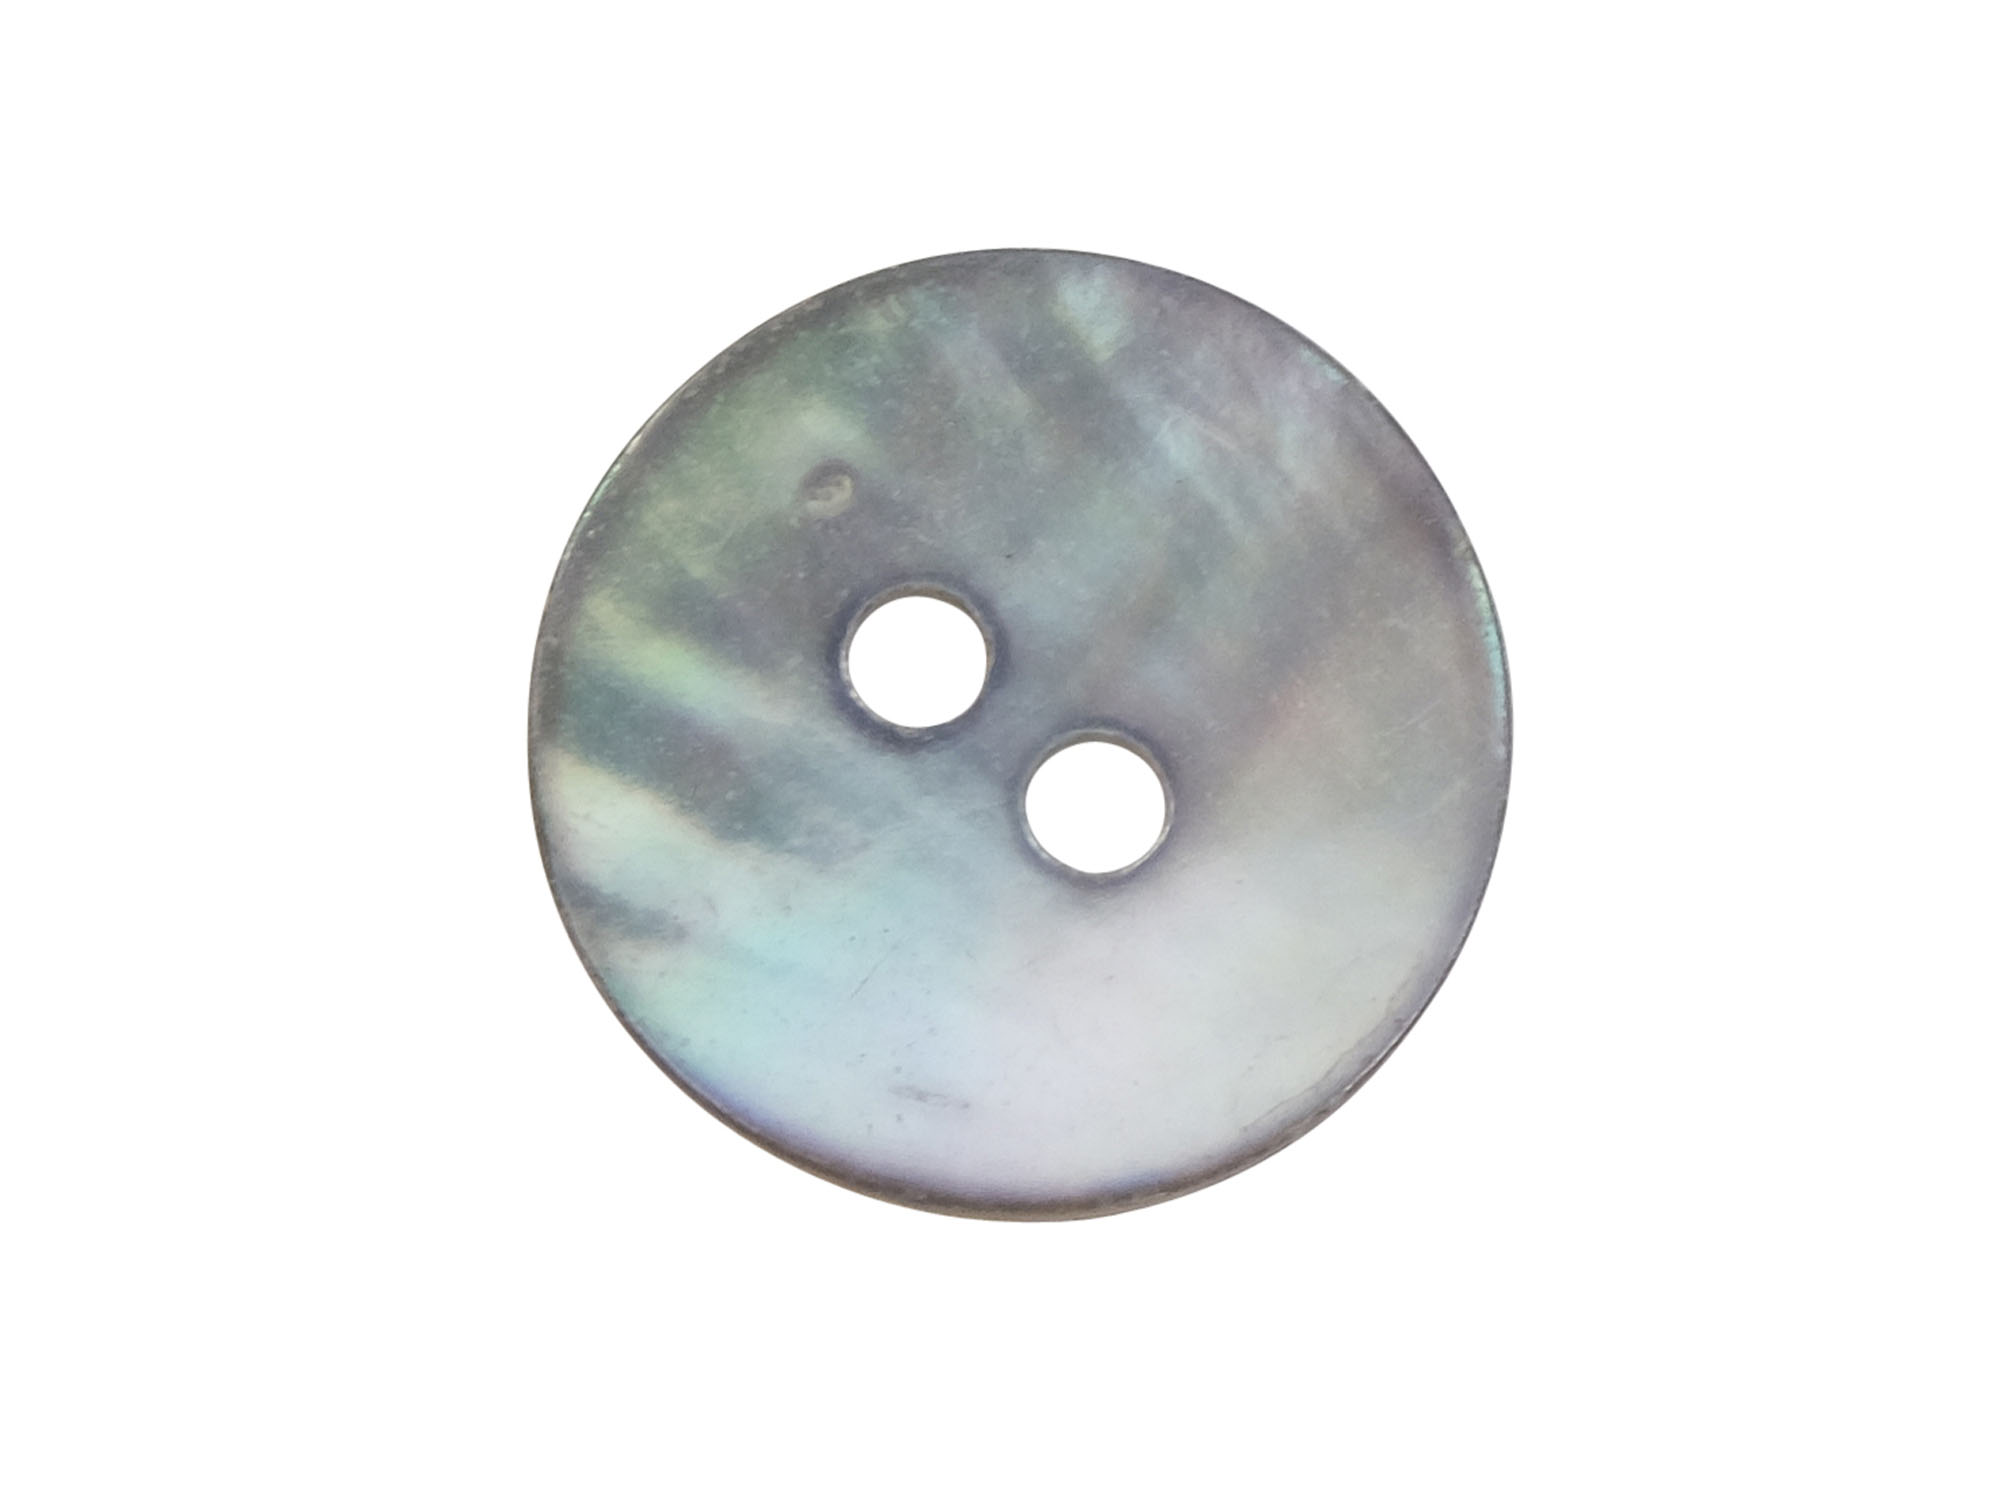 Smoked Akoya Mother of Pearl Button: 20L (12.5mm or 0.492") mother-of-pearl buttons, mother of pearl shell buttons, nacre, acoya, agoya